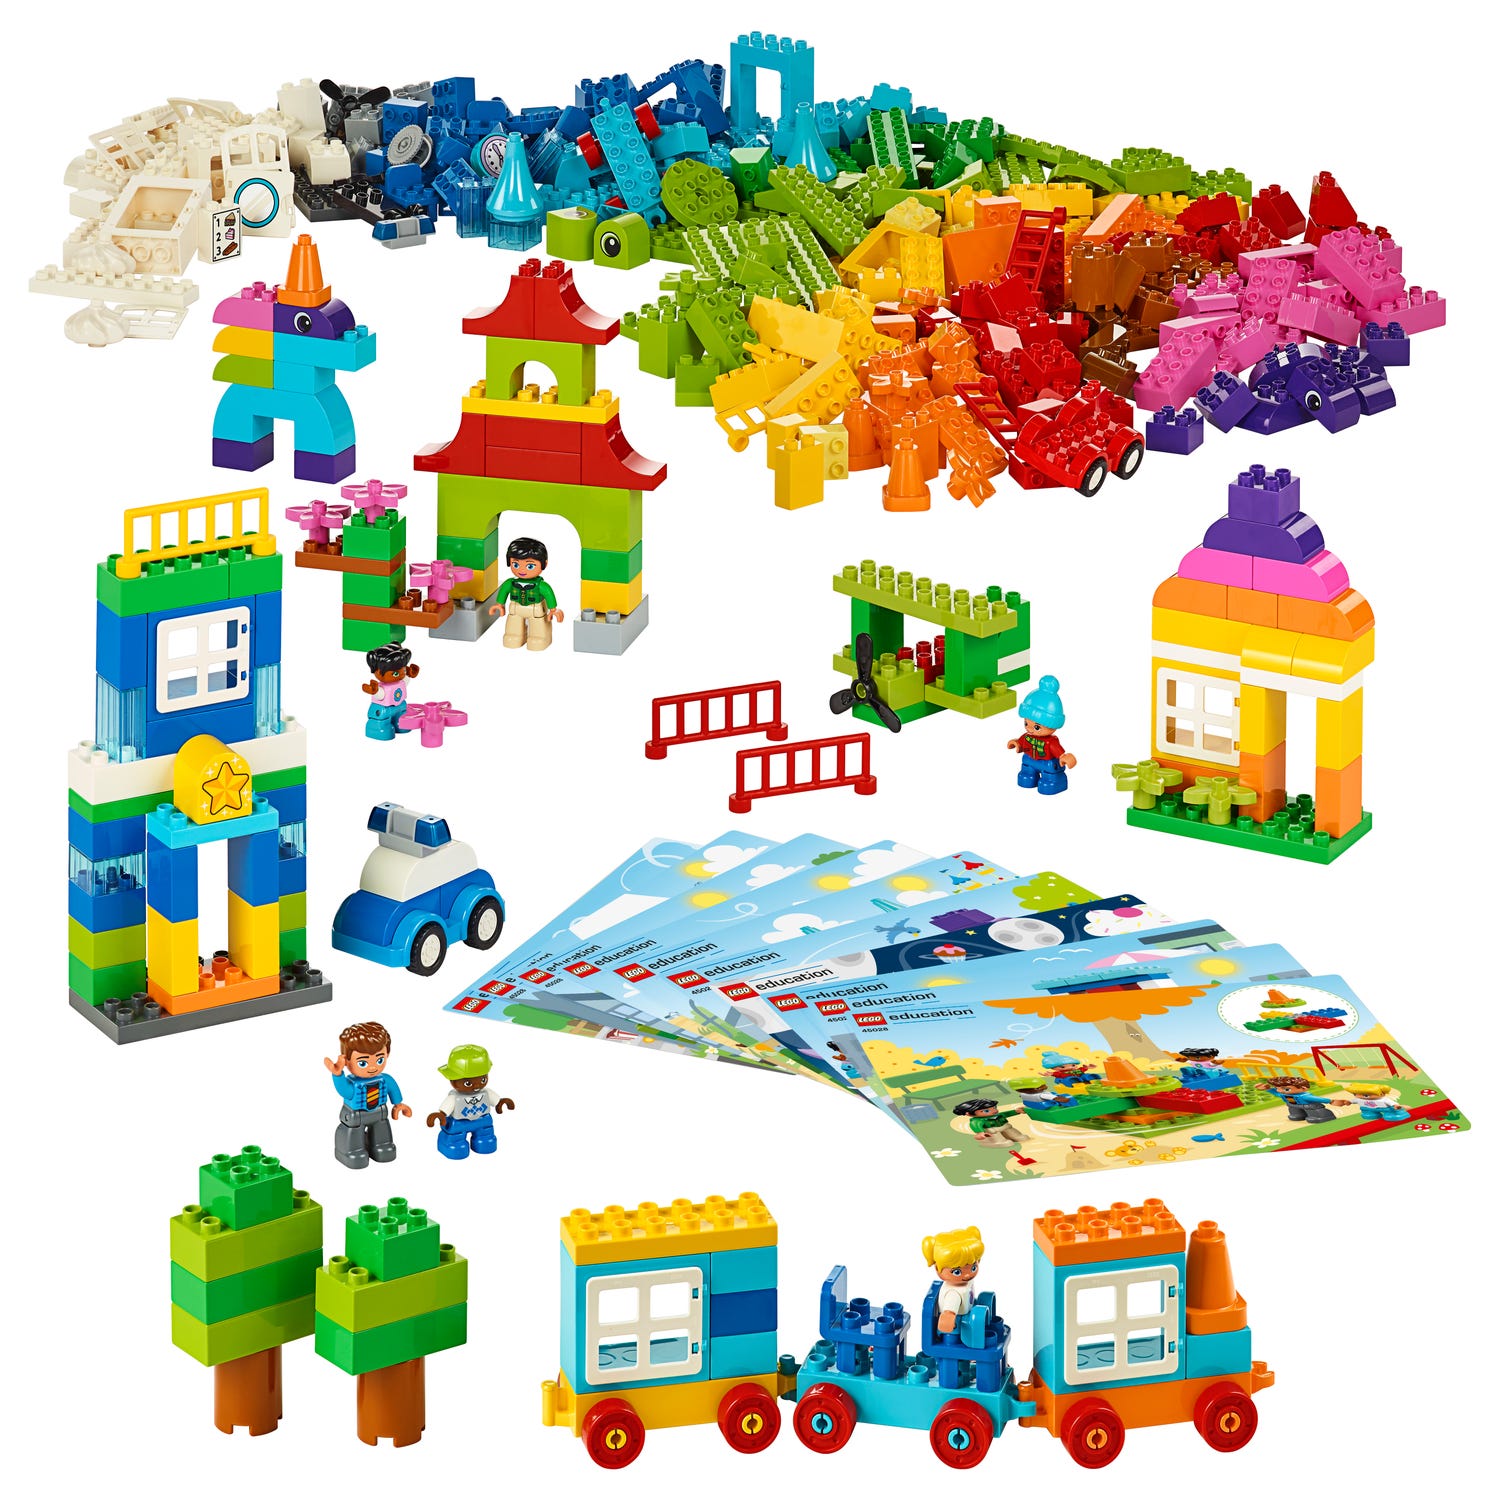 Education My World 45028 | Education | Buy online at the Official LEGO® Shop US